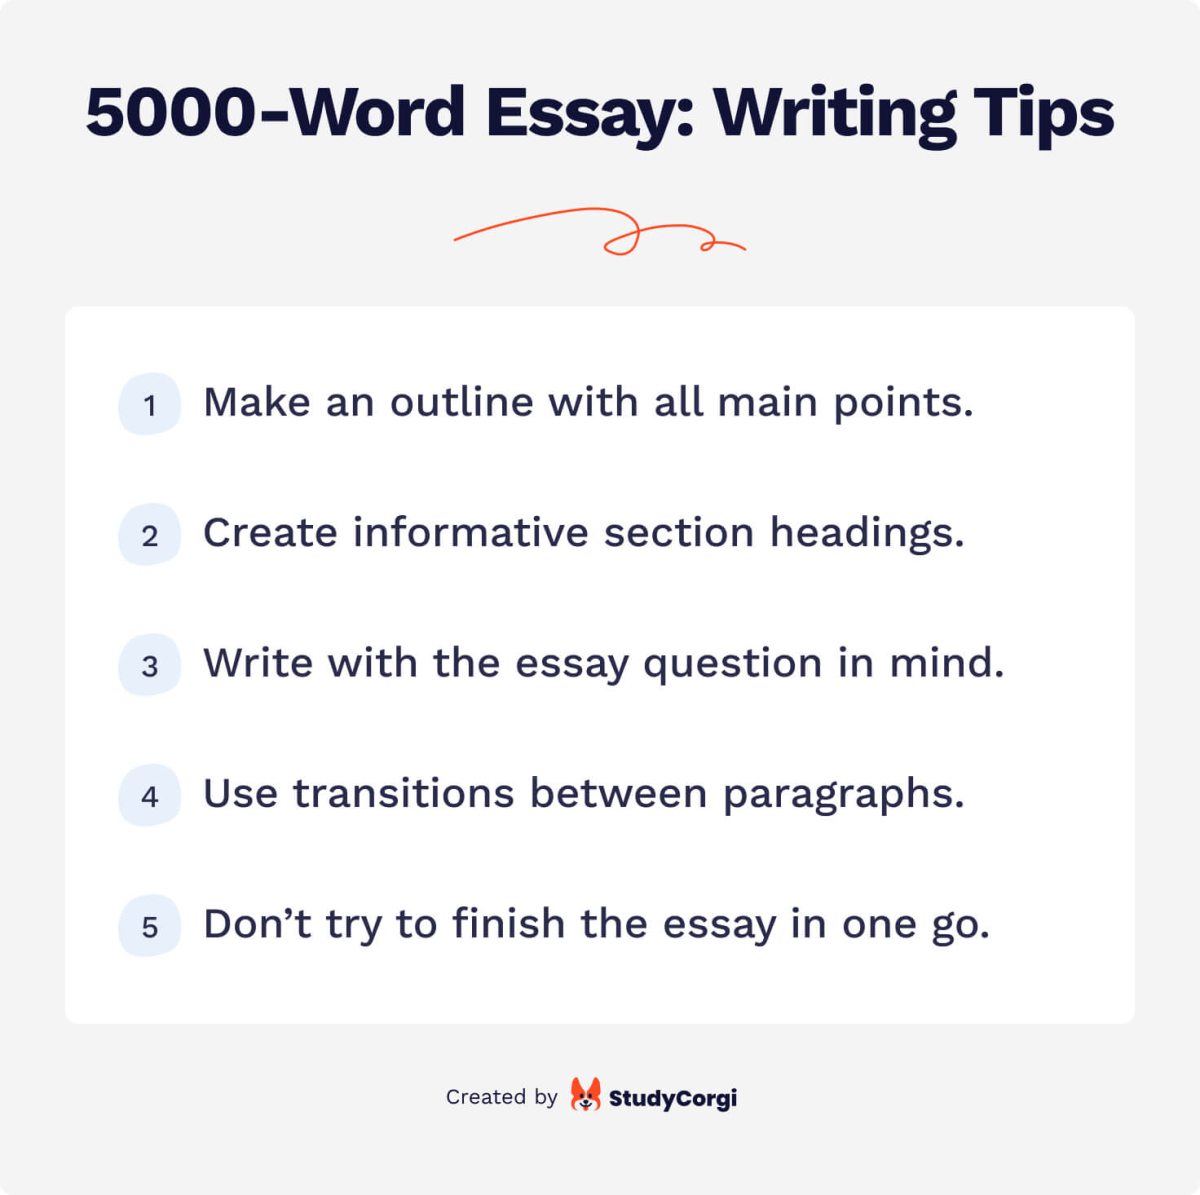 how many references should a 5000 word essay have